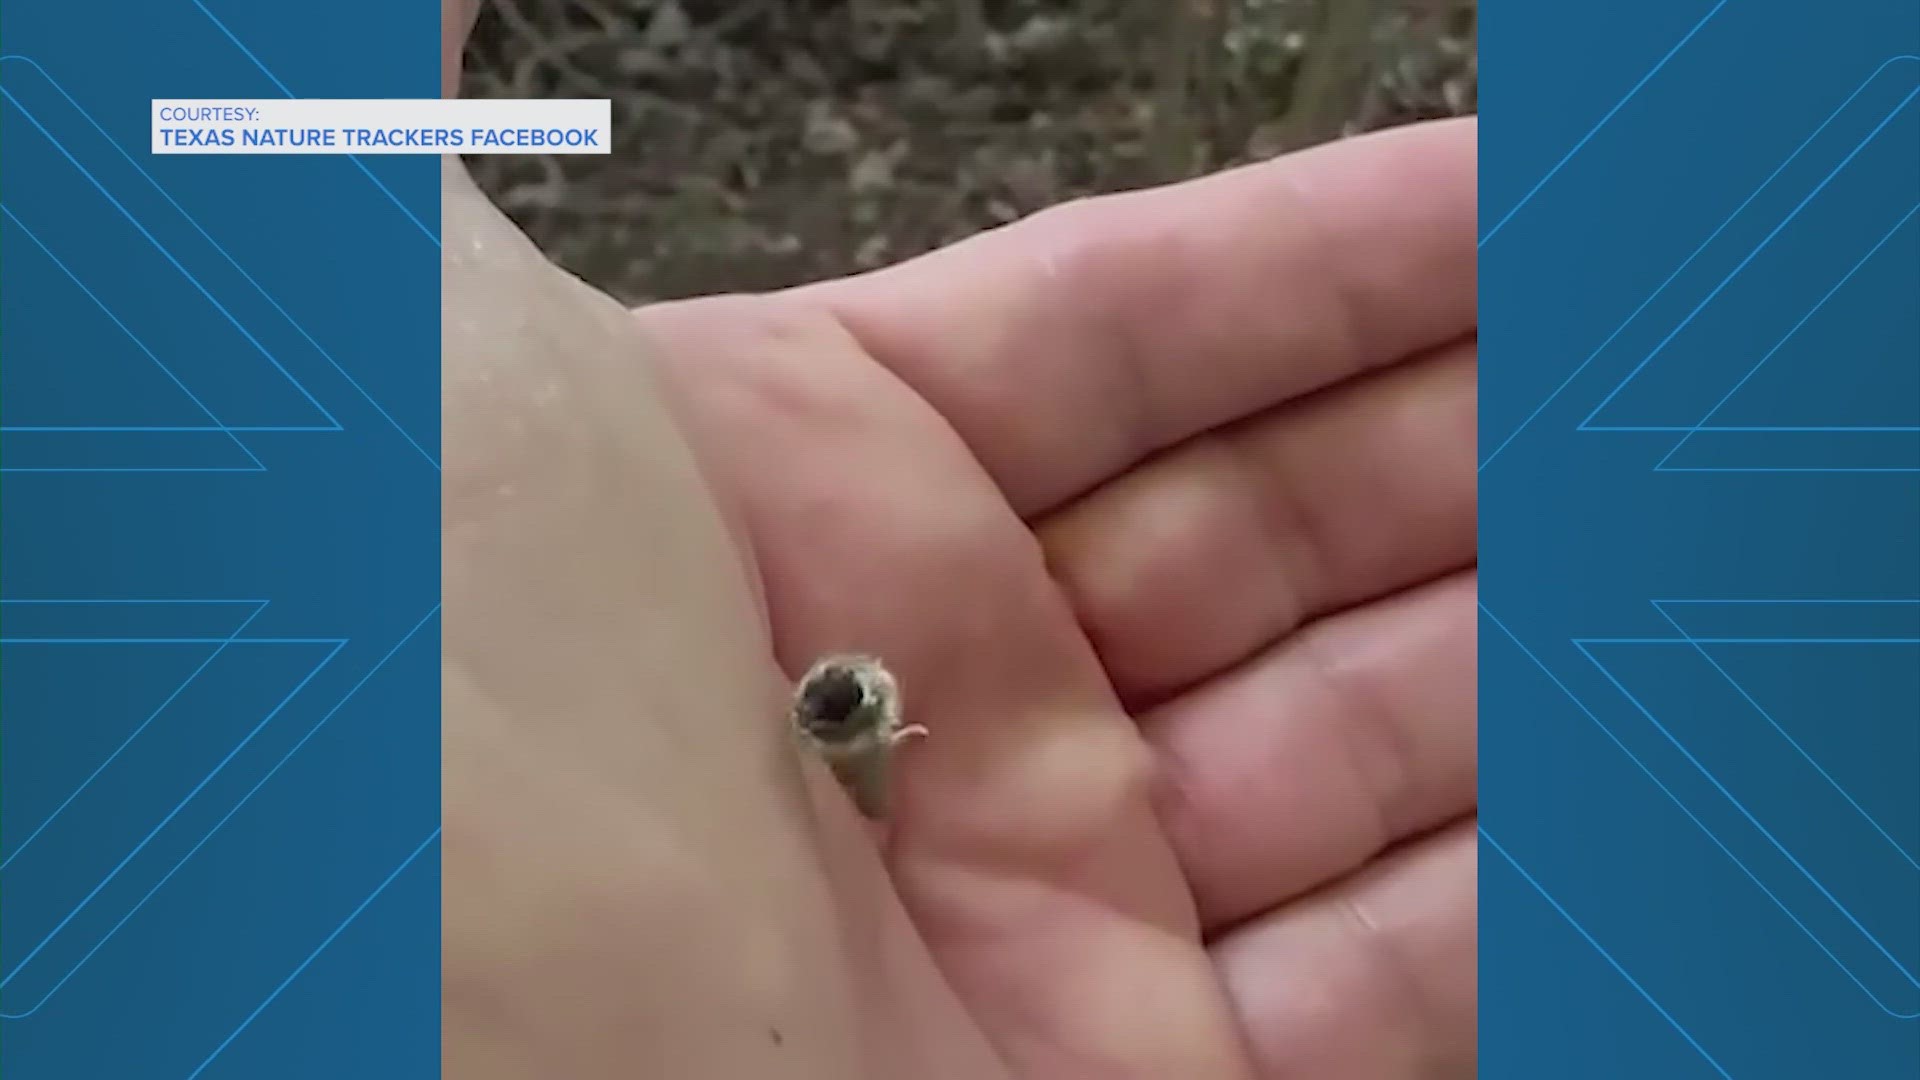 The video is from the Texas Nature Trackers Facebook page, and there are plenty of guesses as to what it is.